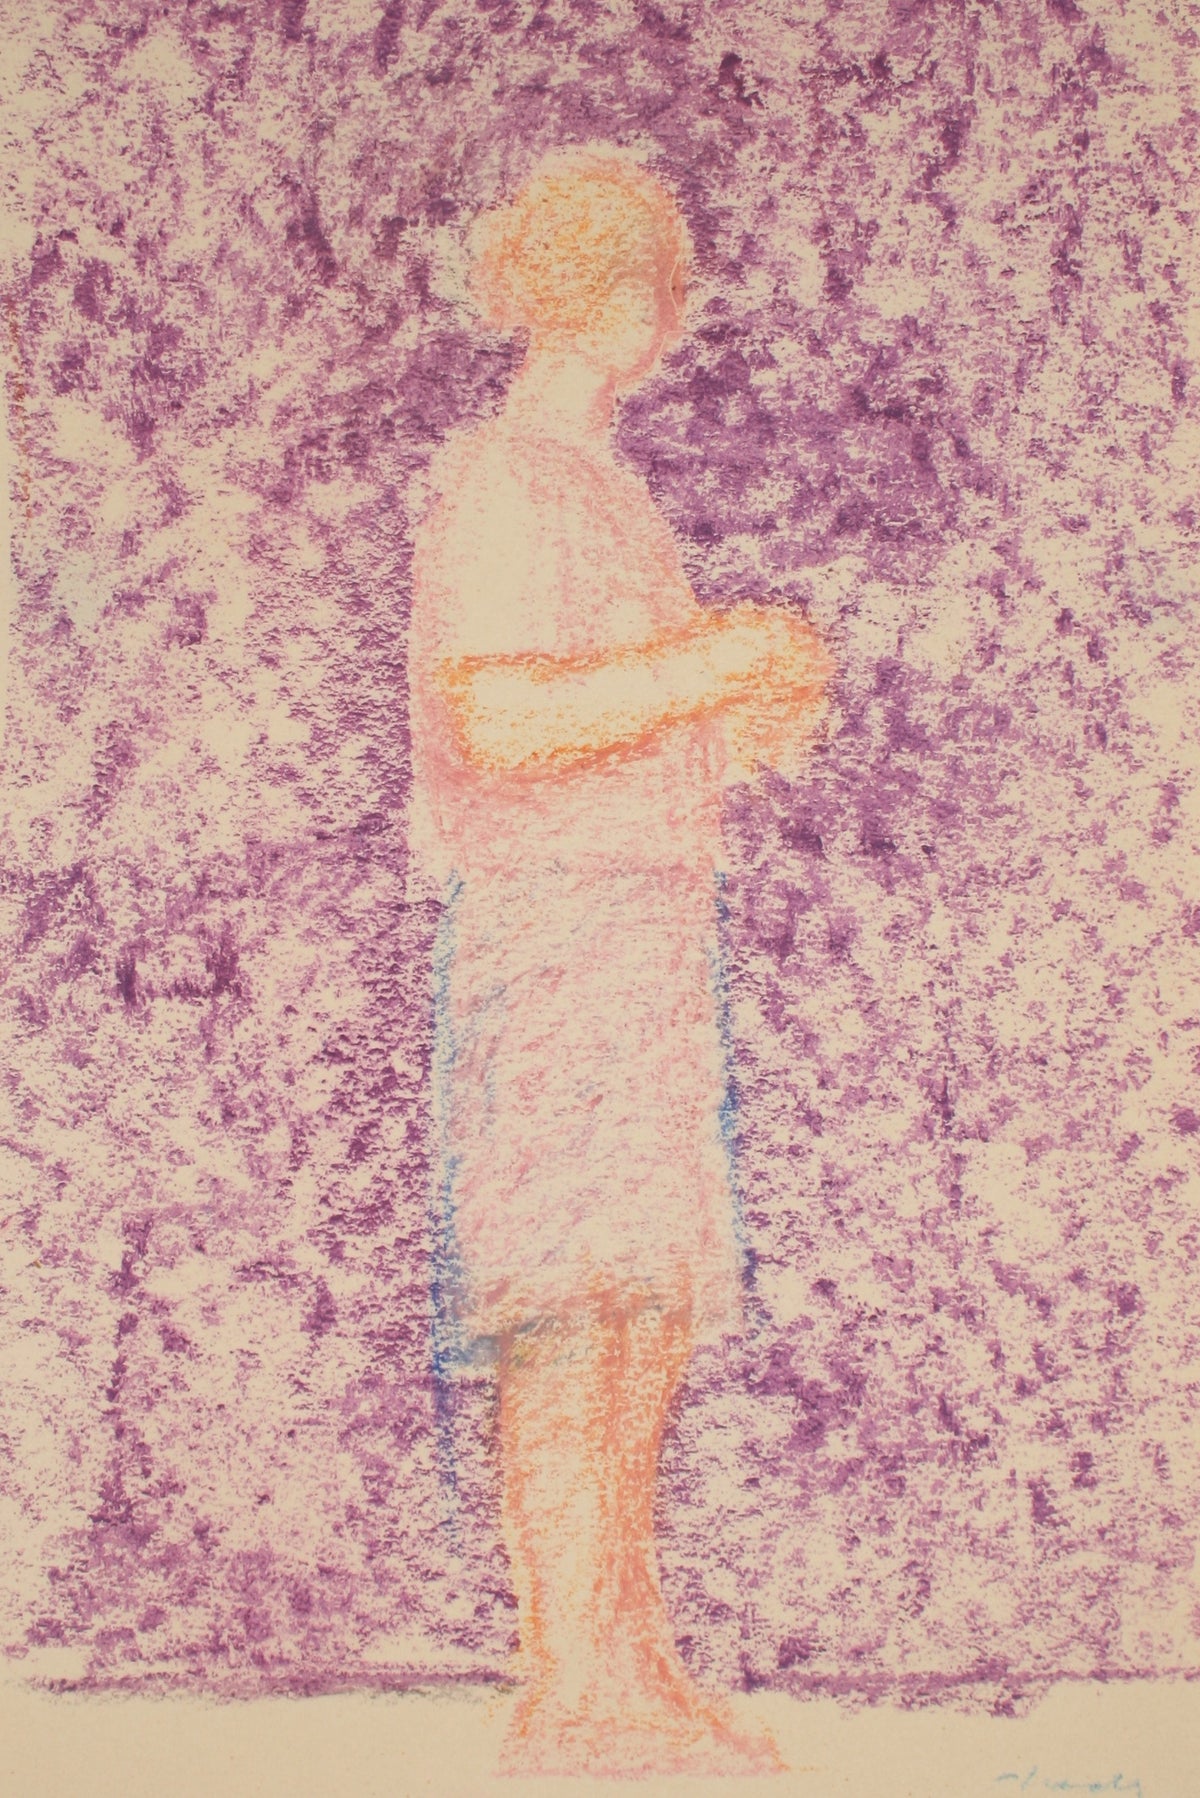 Woman in Pink &lt;br&gt;Late 20th Century Pastel &lt;br&gt;&lt;br&gt;#71515